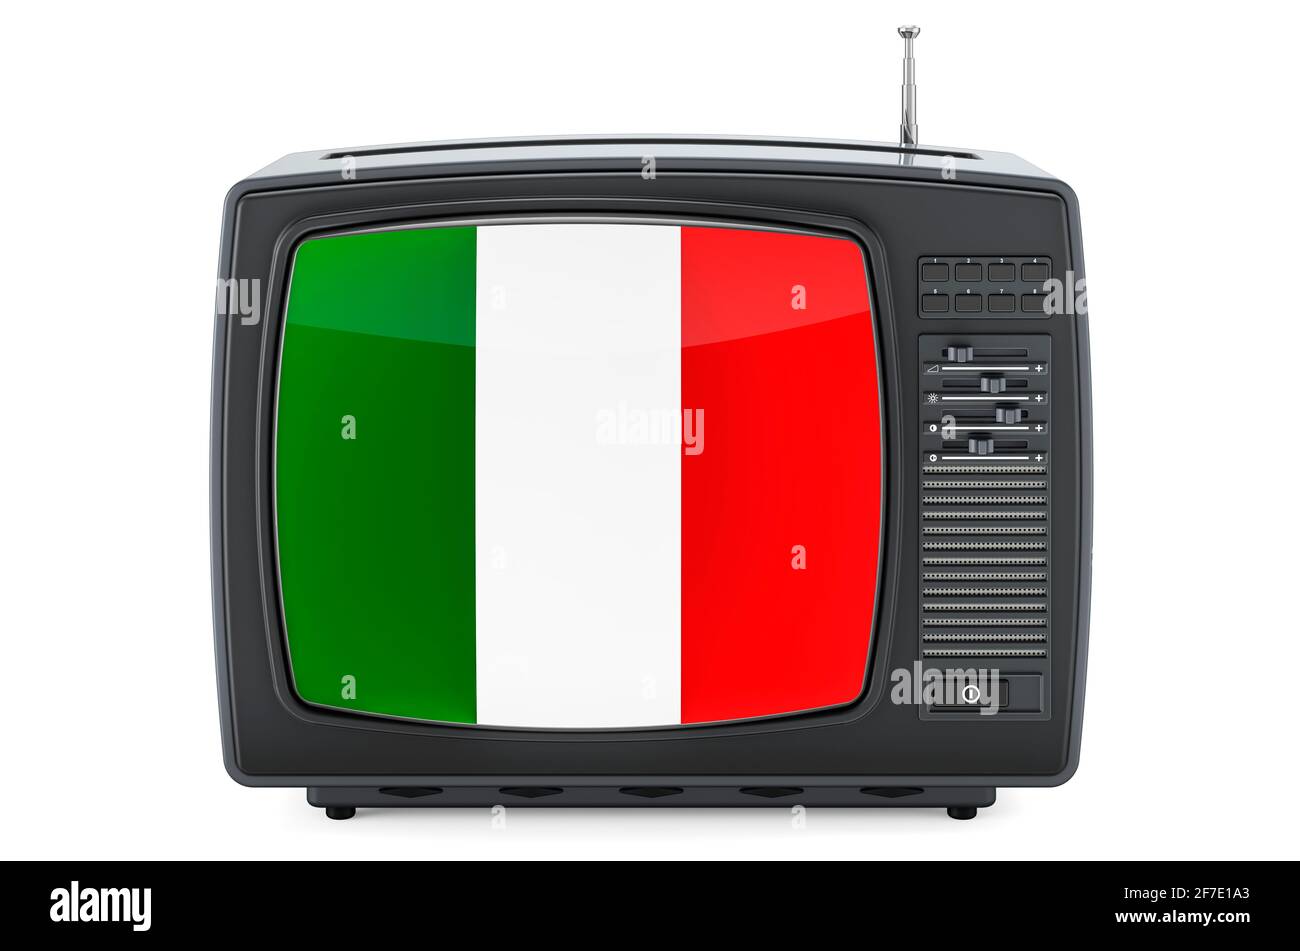 Italian Television concept. TV set with flag of Italy. 3D rendering isolated on white background Stock Photo